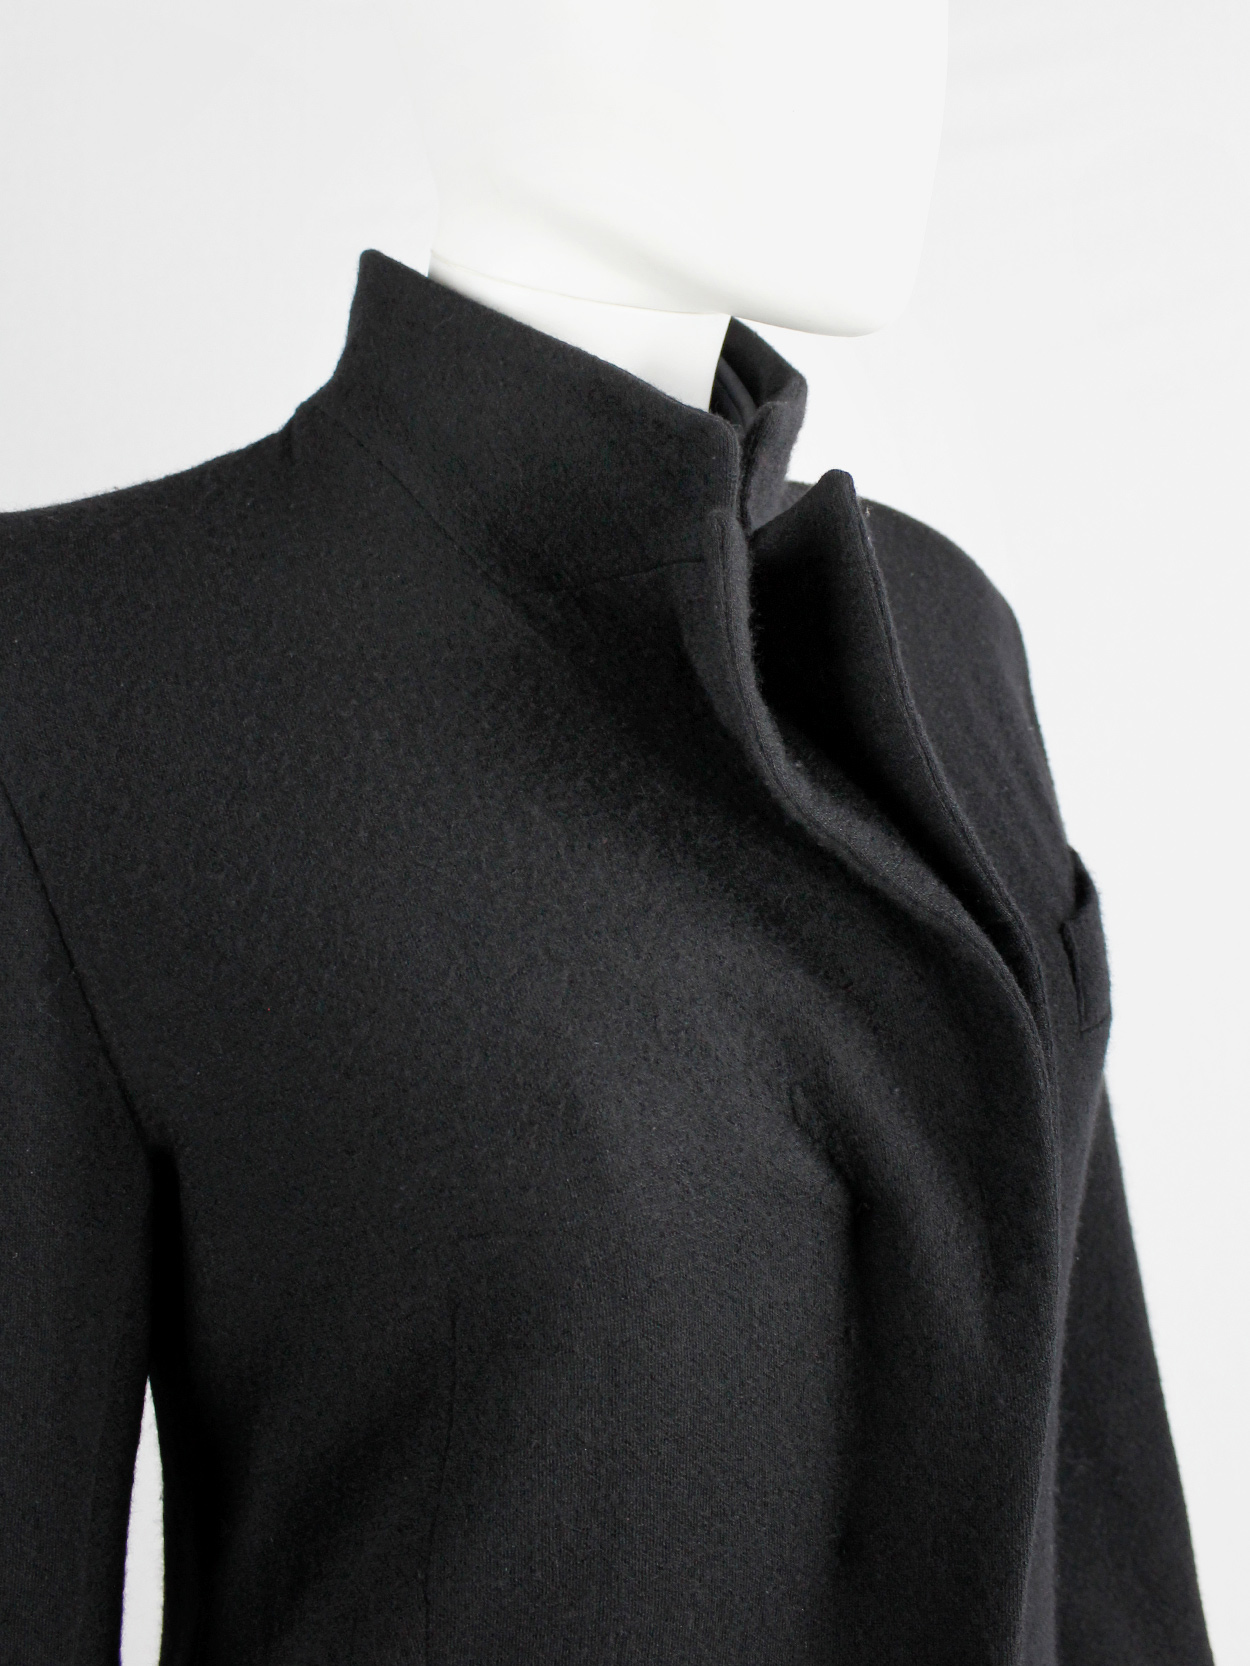 A.F. Vandevorst black wool coat with forward closing front and boning ...